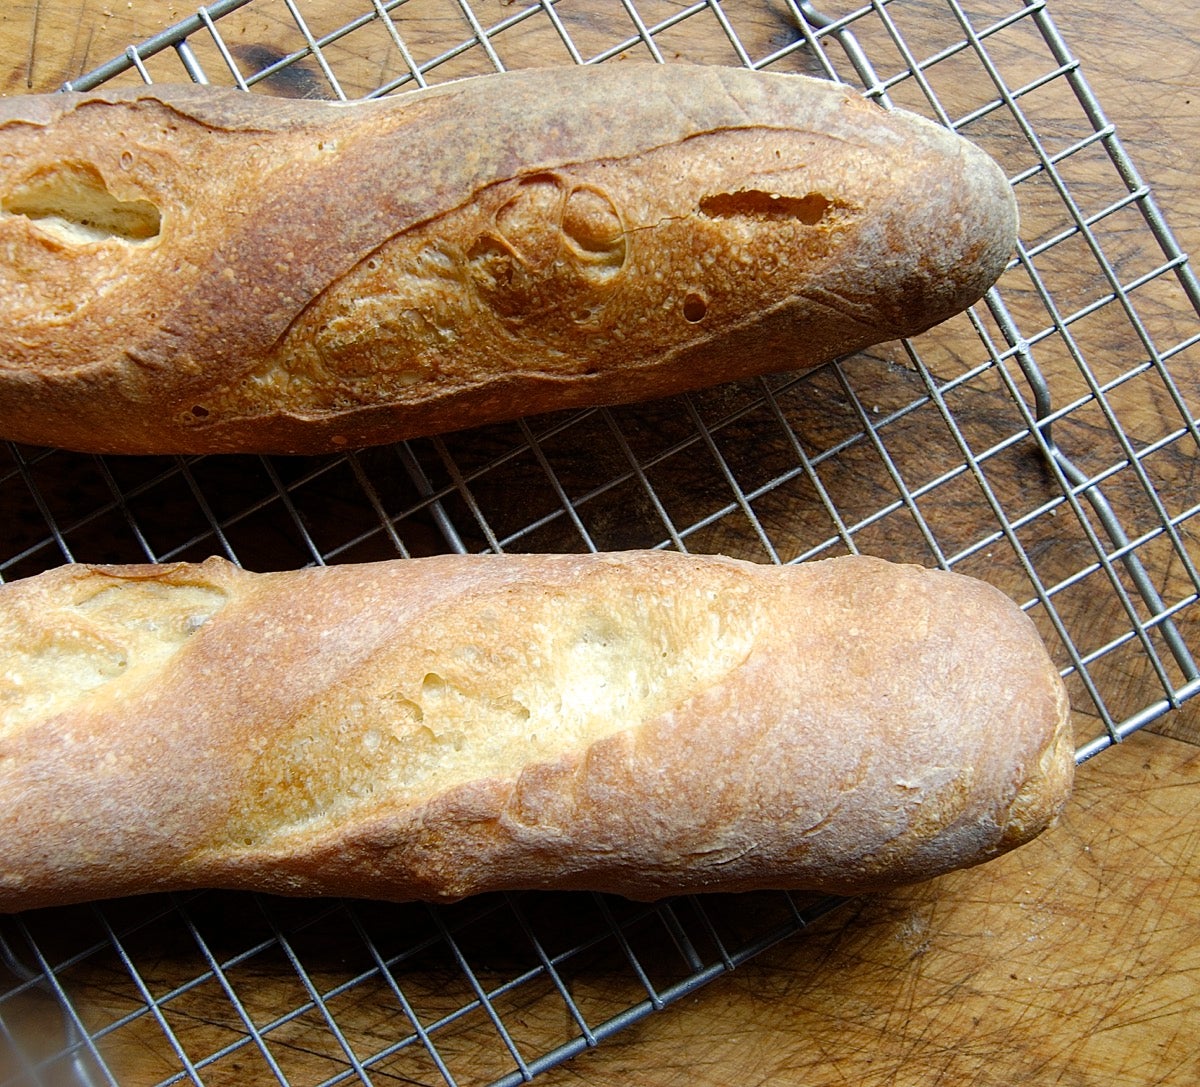 https://www.kingarthurbaking.com/sites/default/files/blog-images/2017/03/Using-a-Thermometer-with-Yeast-Bread-29.jpg